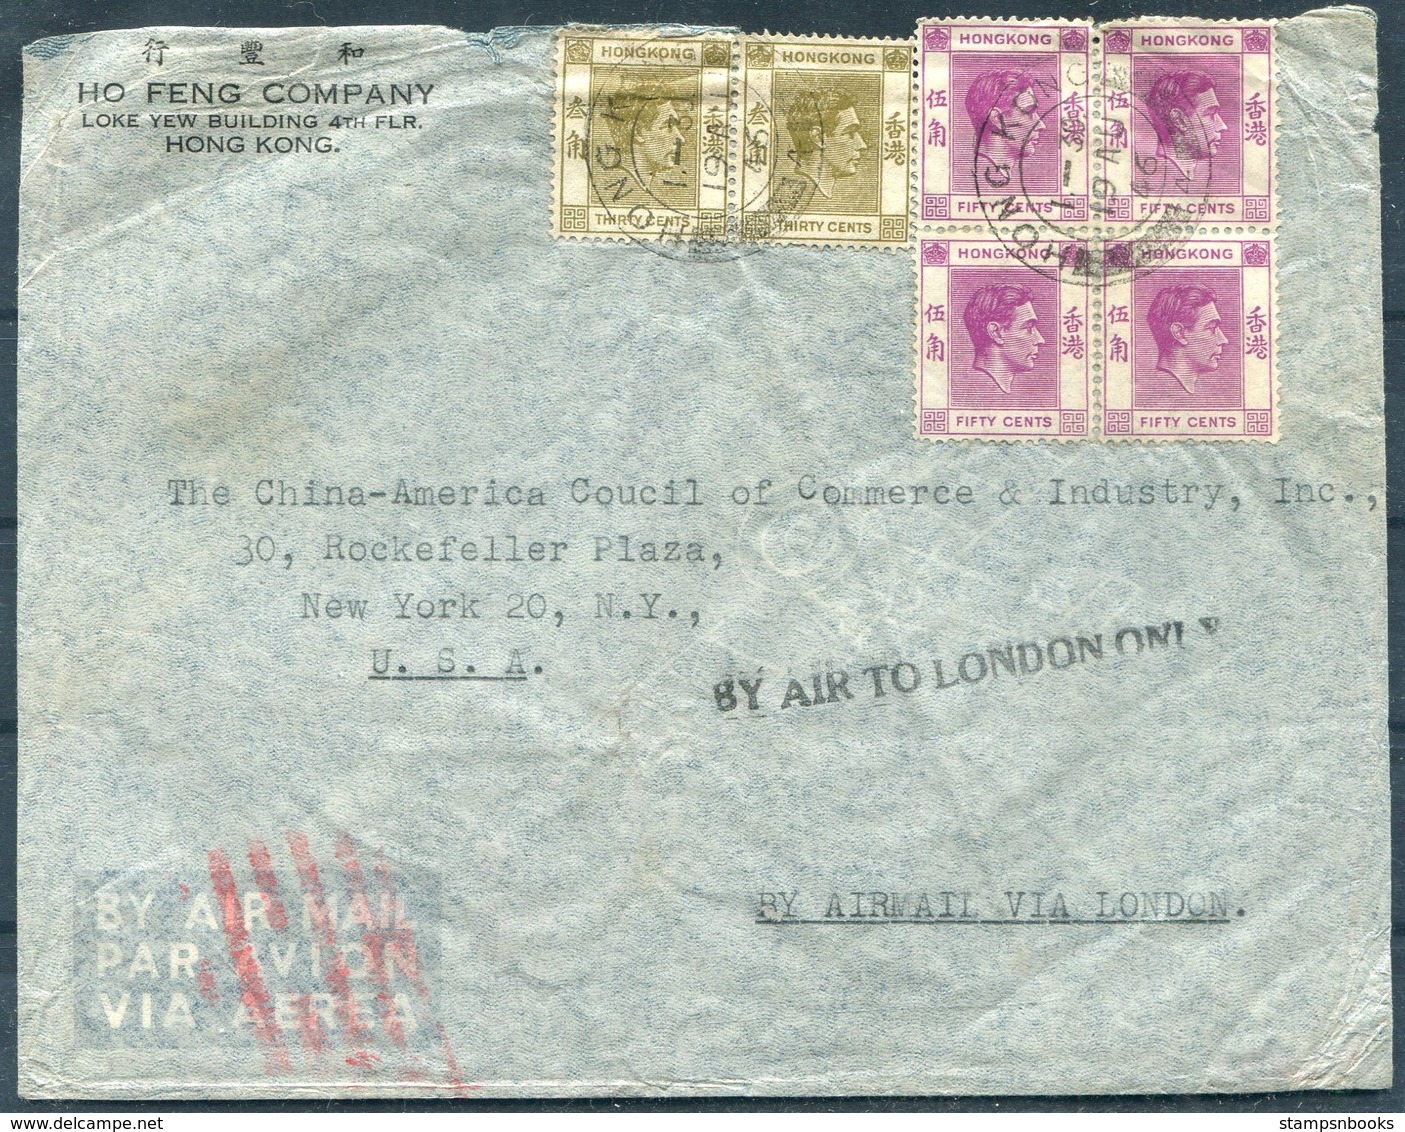 1946 Hong Kong $2.60 Rate Airmail Cover - The China America Council Of Commerce, New York USA. "BY AIR TO LONDON ONLY" - Brieven En Documenten